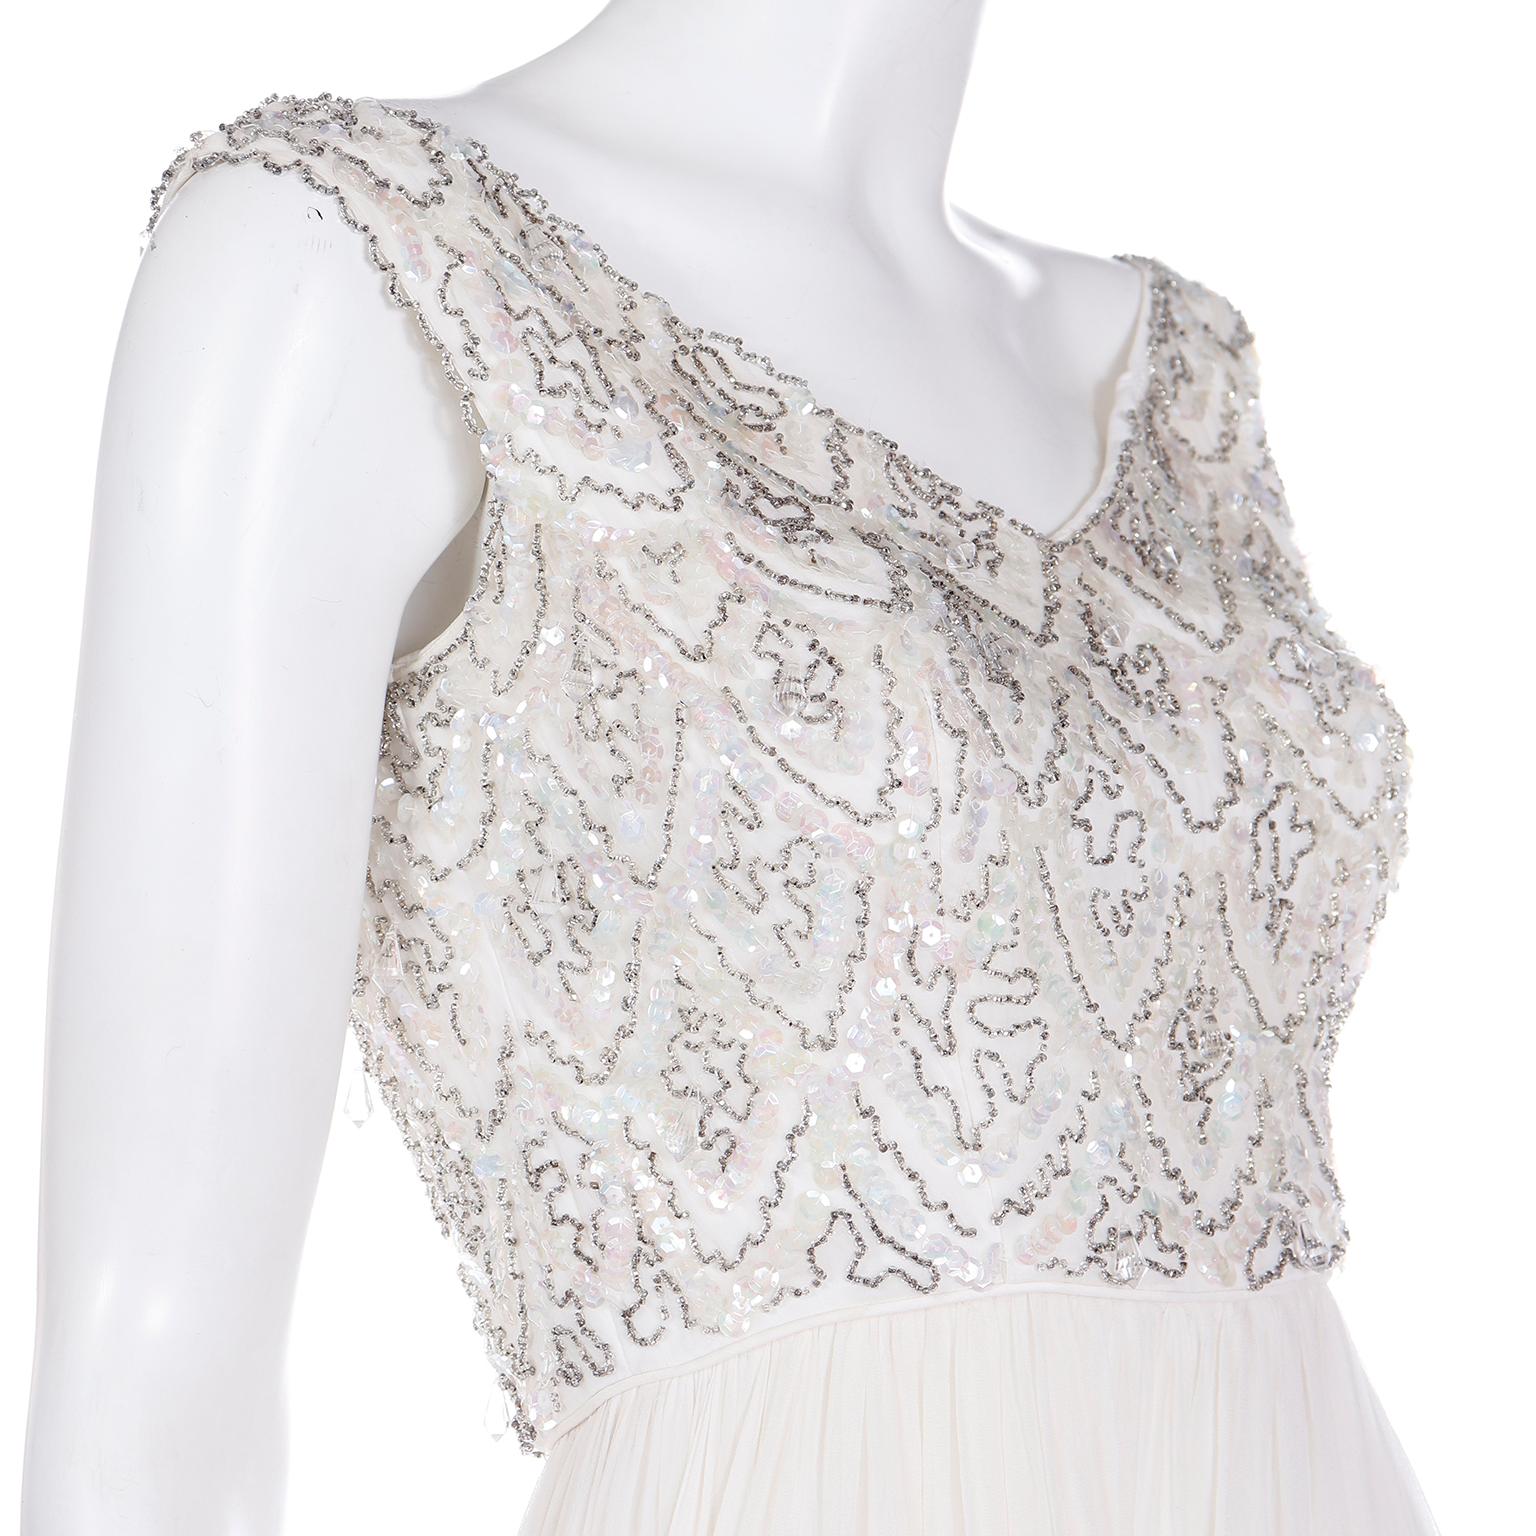 1960s White Silk Chiffon Evening Dress With Silver Beads and Iridescent Sequins For Sale 2